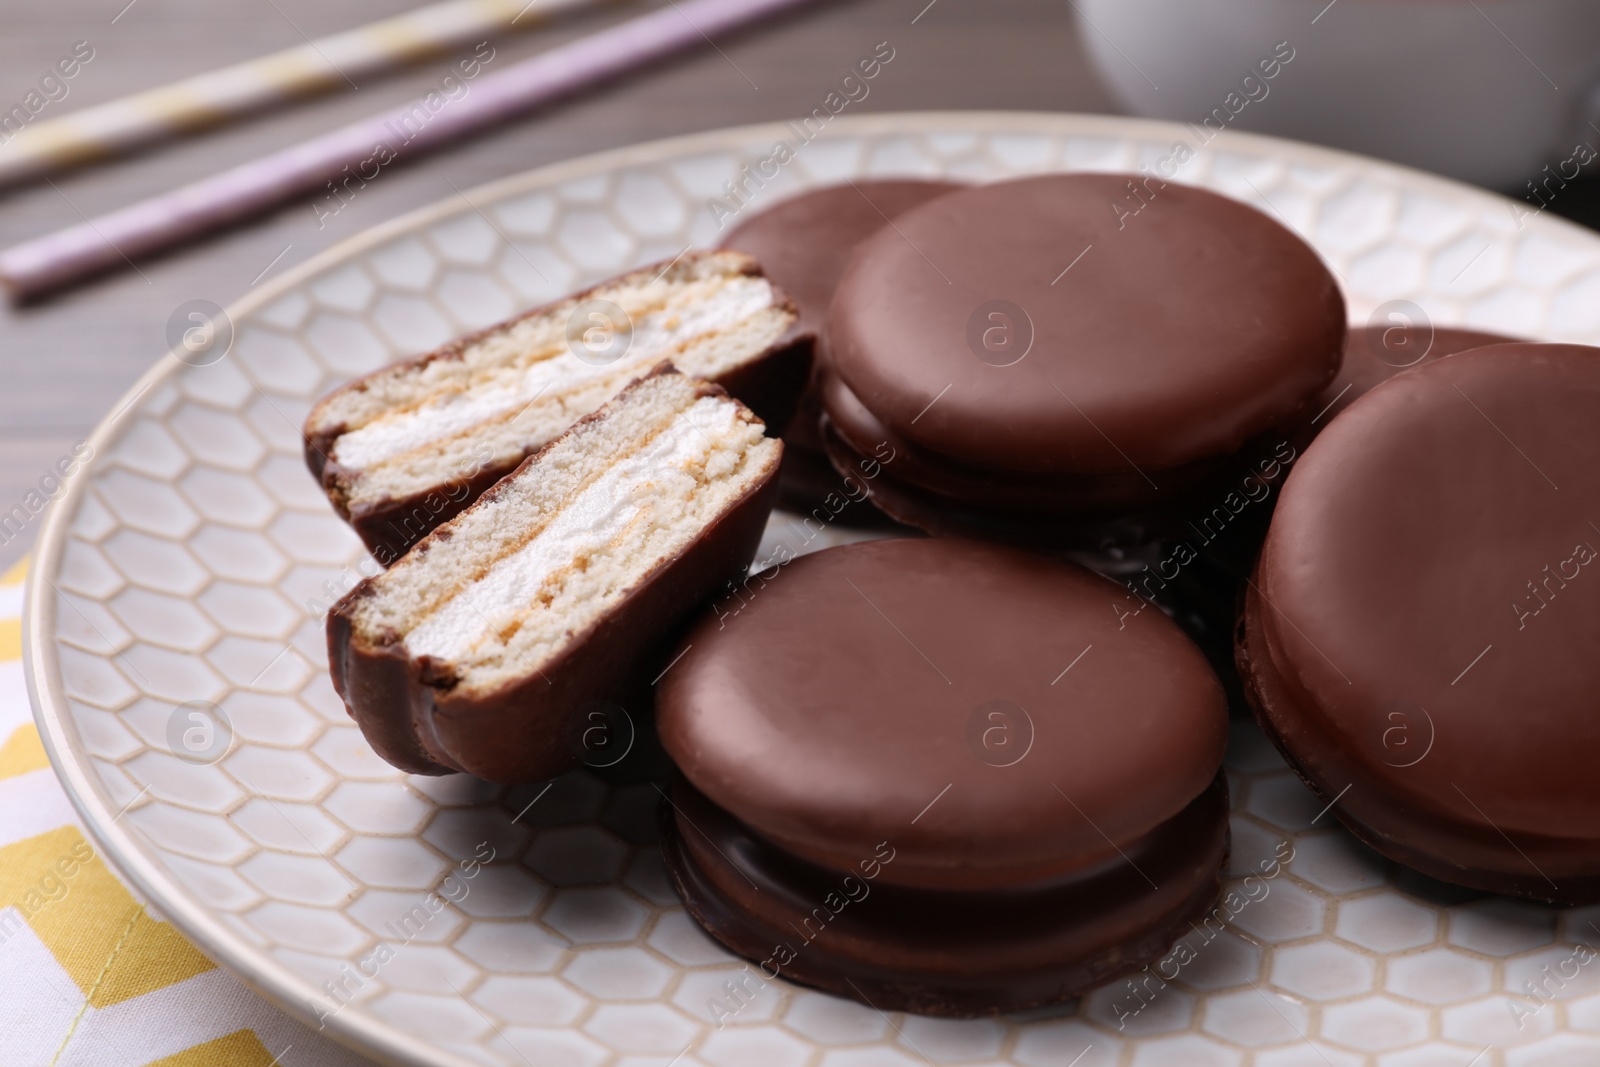 Photo of Tasty choco pies on plate, closeup view